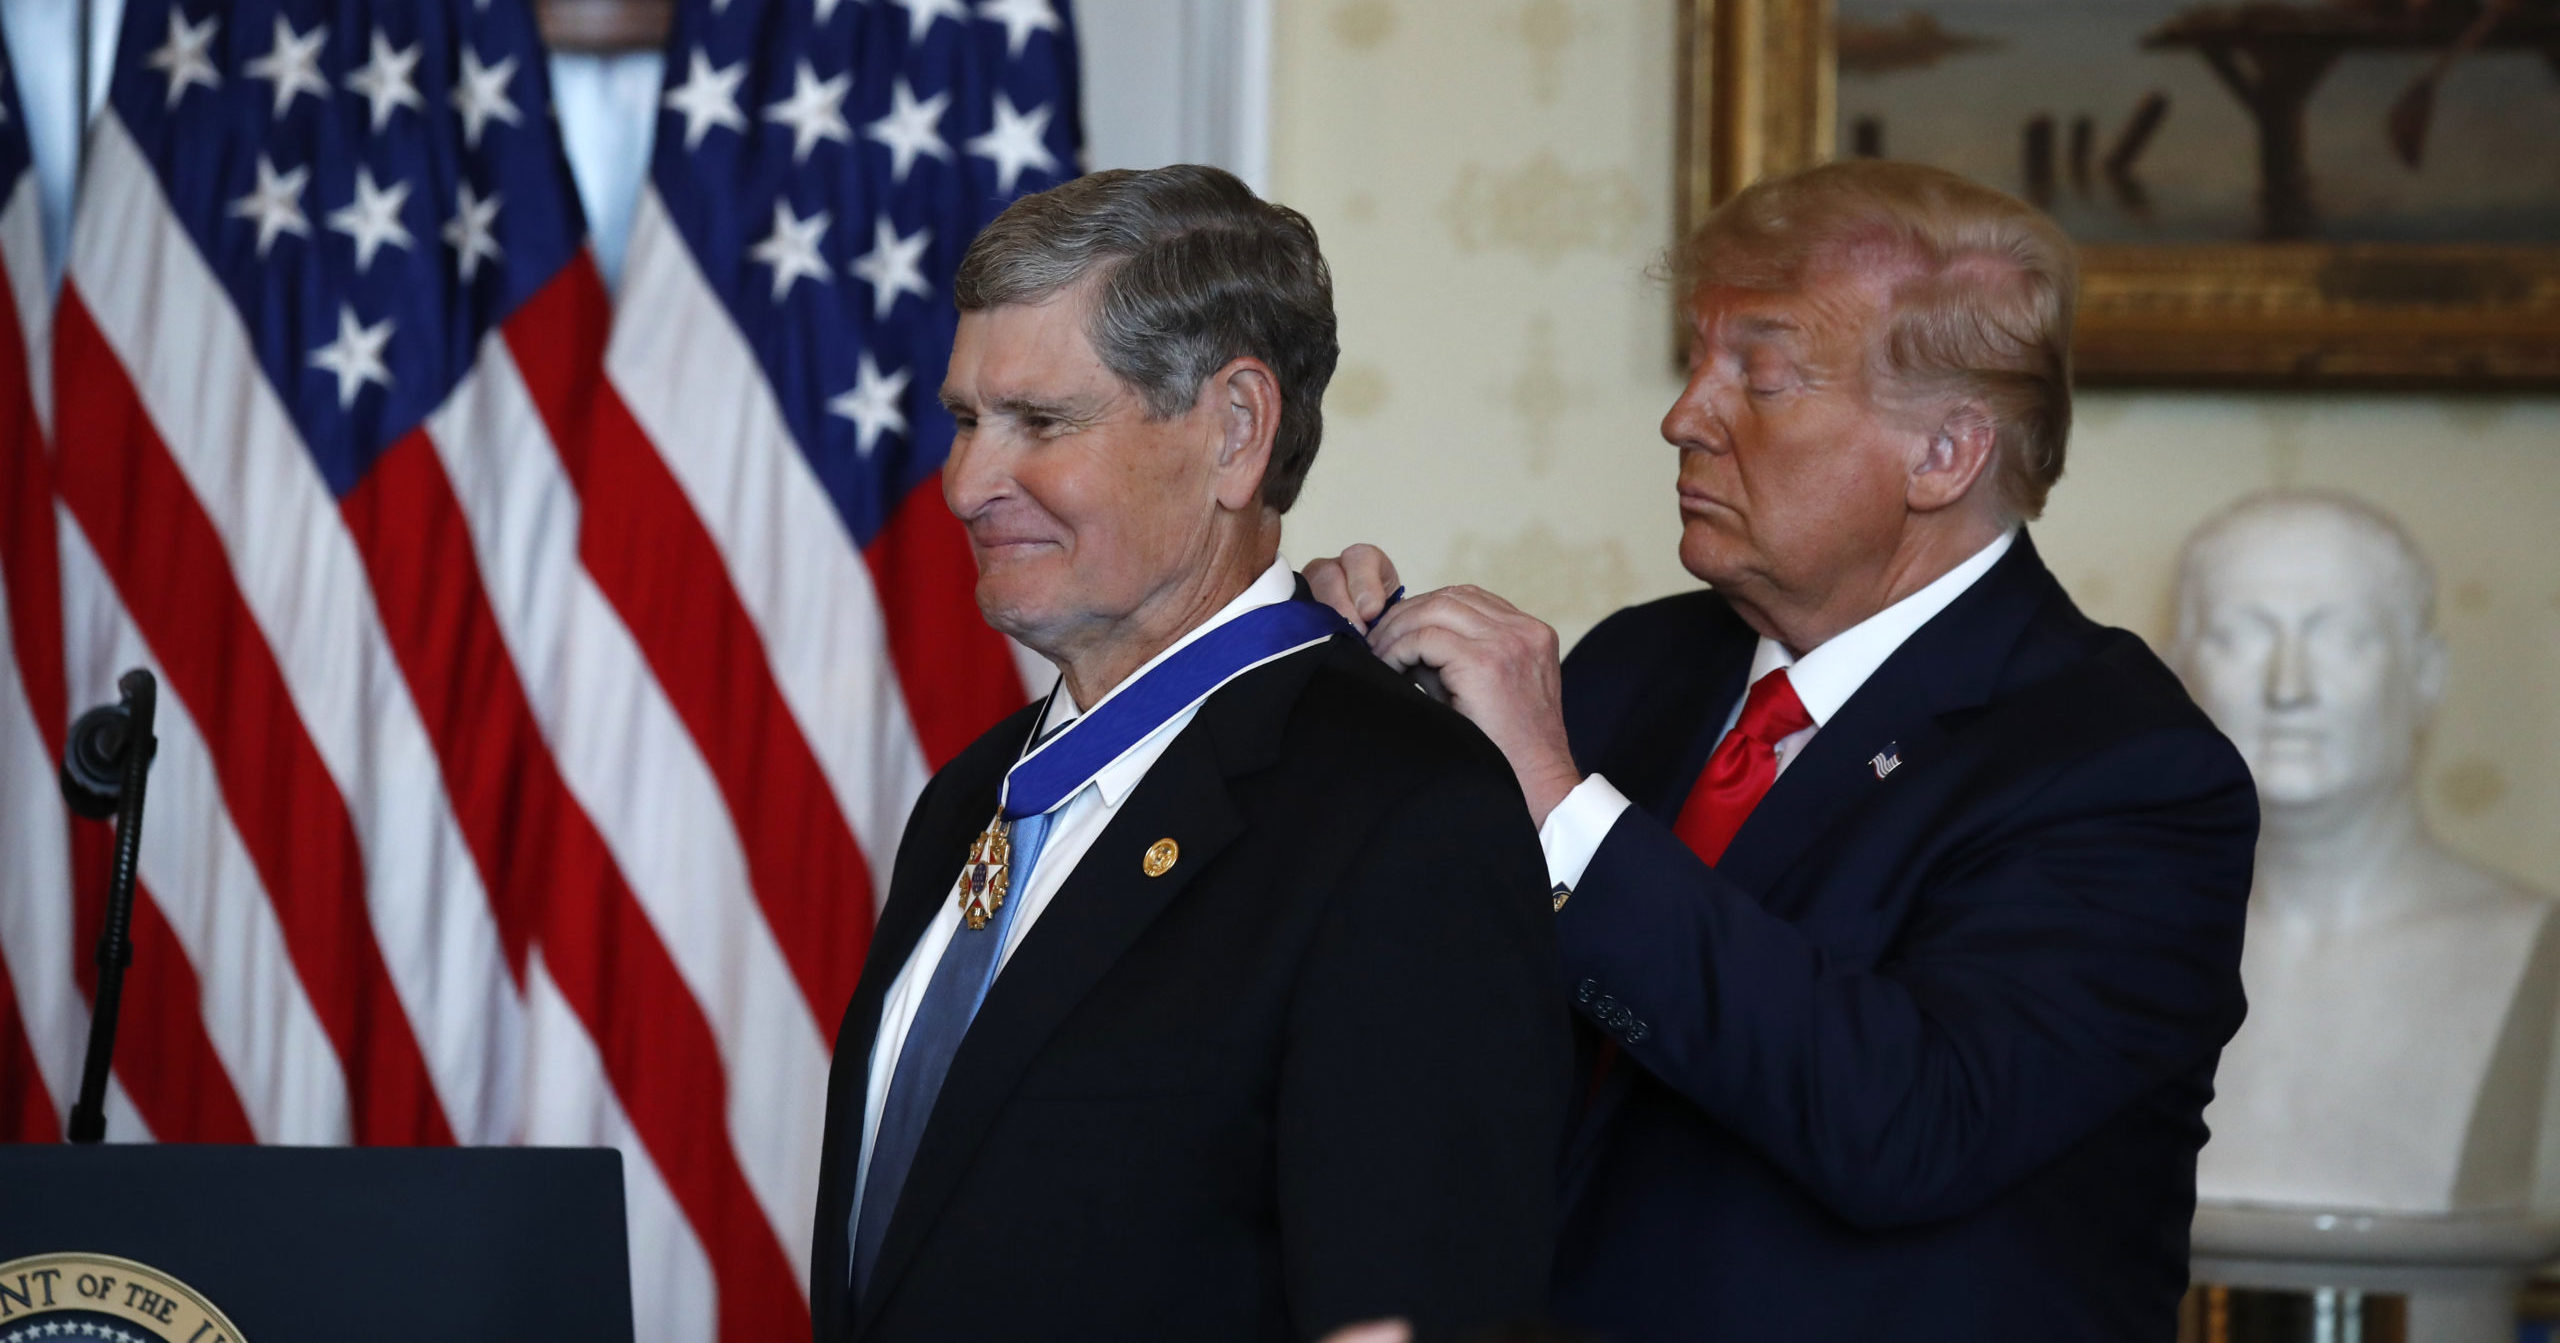 President Donald Trump presents the Presidential Medal of Freedom to Jim Ryun in the Blue Room of the White House on July 24, 2020, in Washington, D.C.